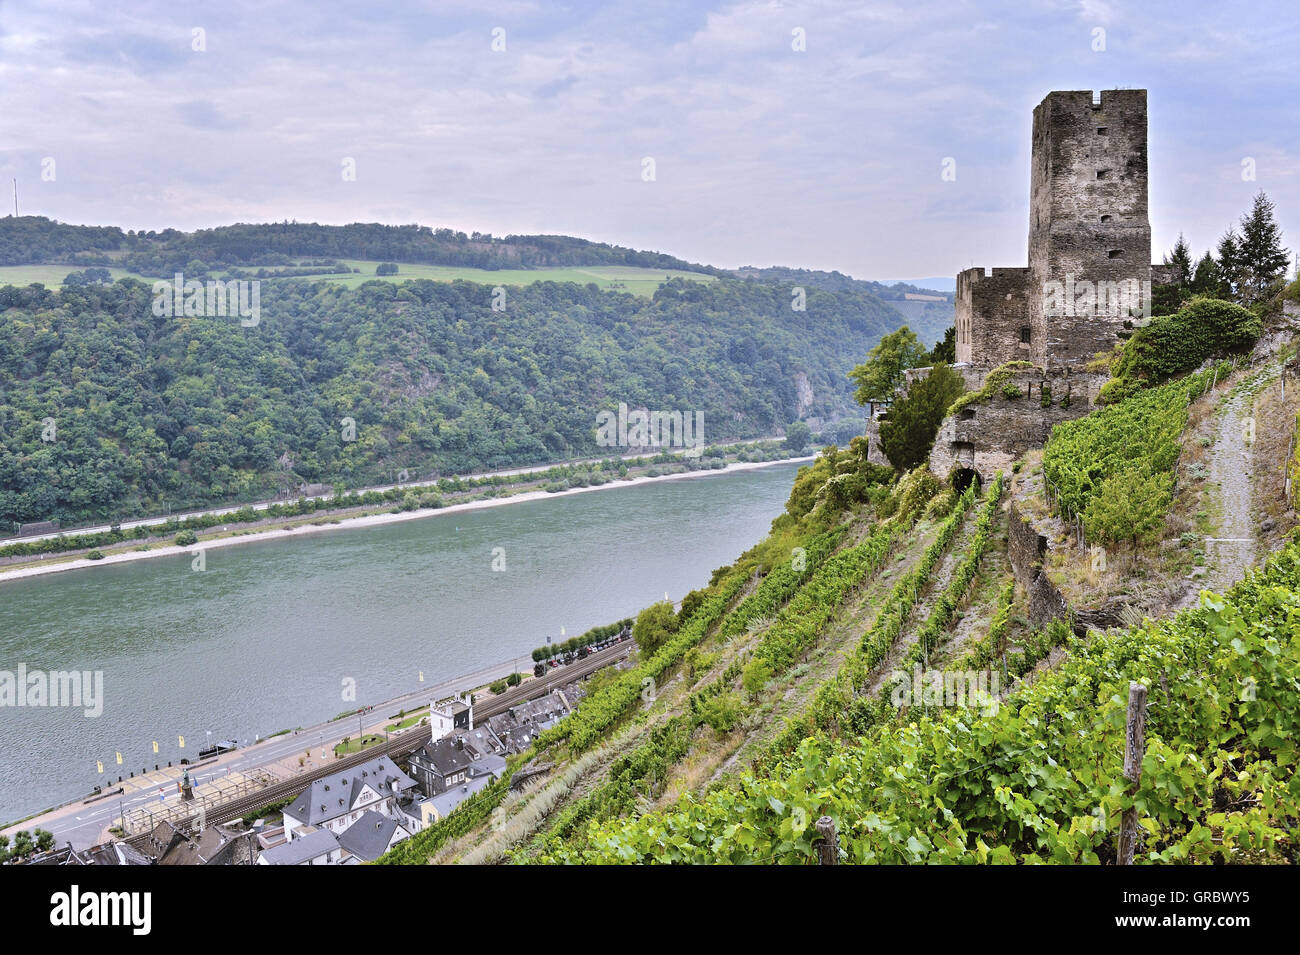 Gutenfels Castle, Also Known As Caub Castle, Above Town Kaub, Upper Middle Rhine Valley, Germany Stock Photo